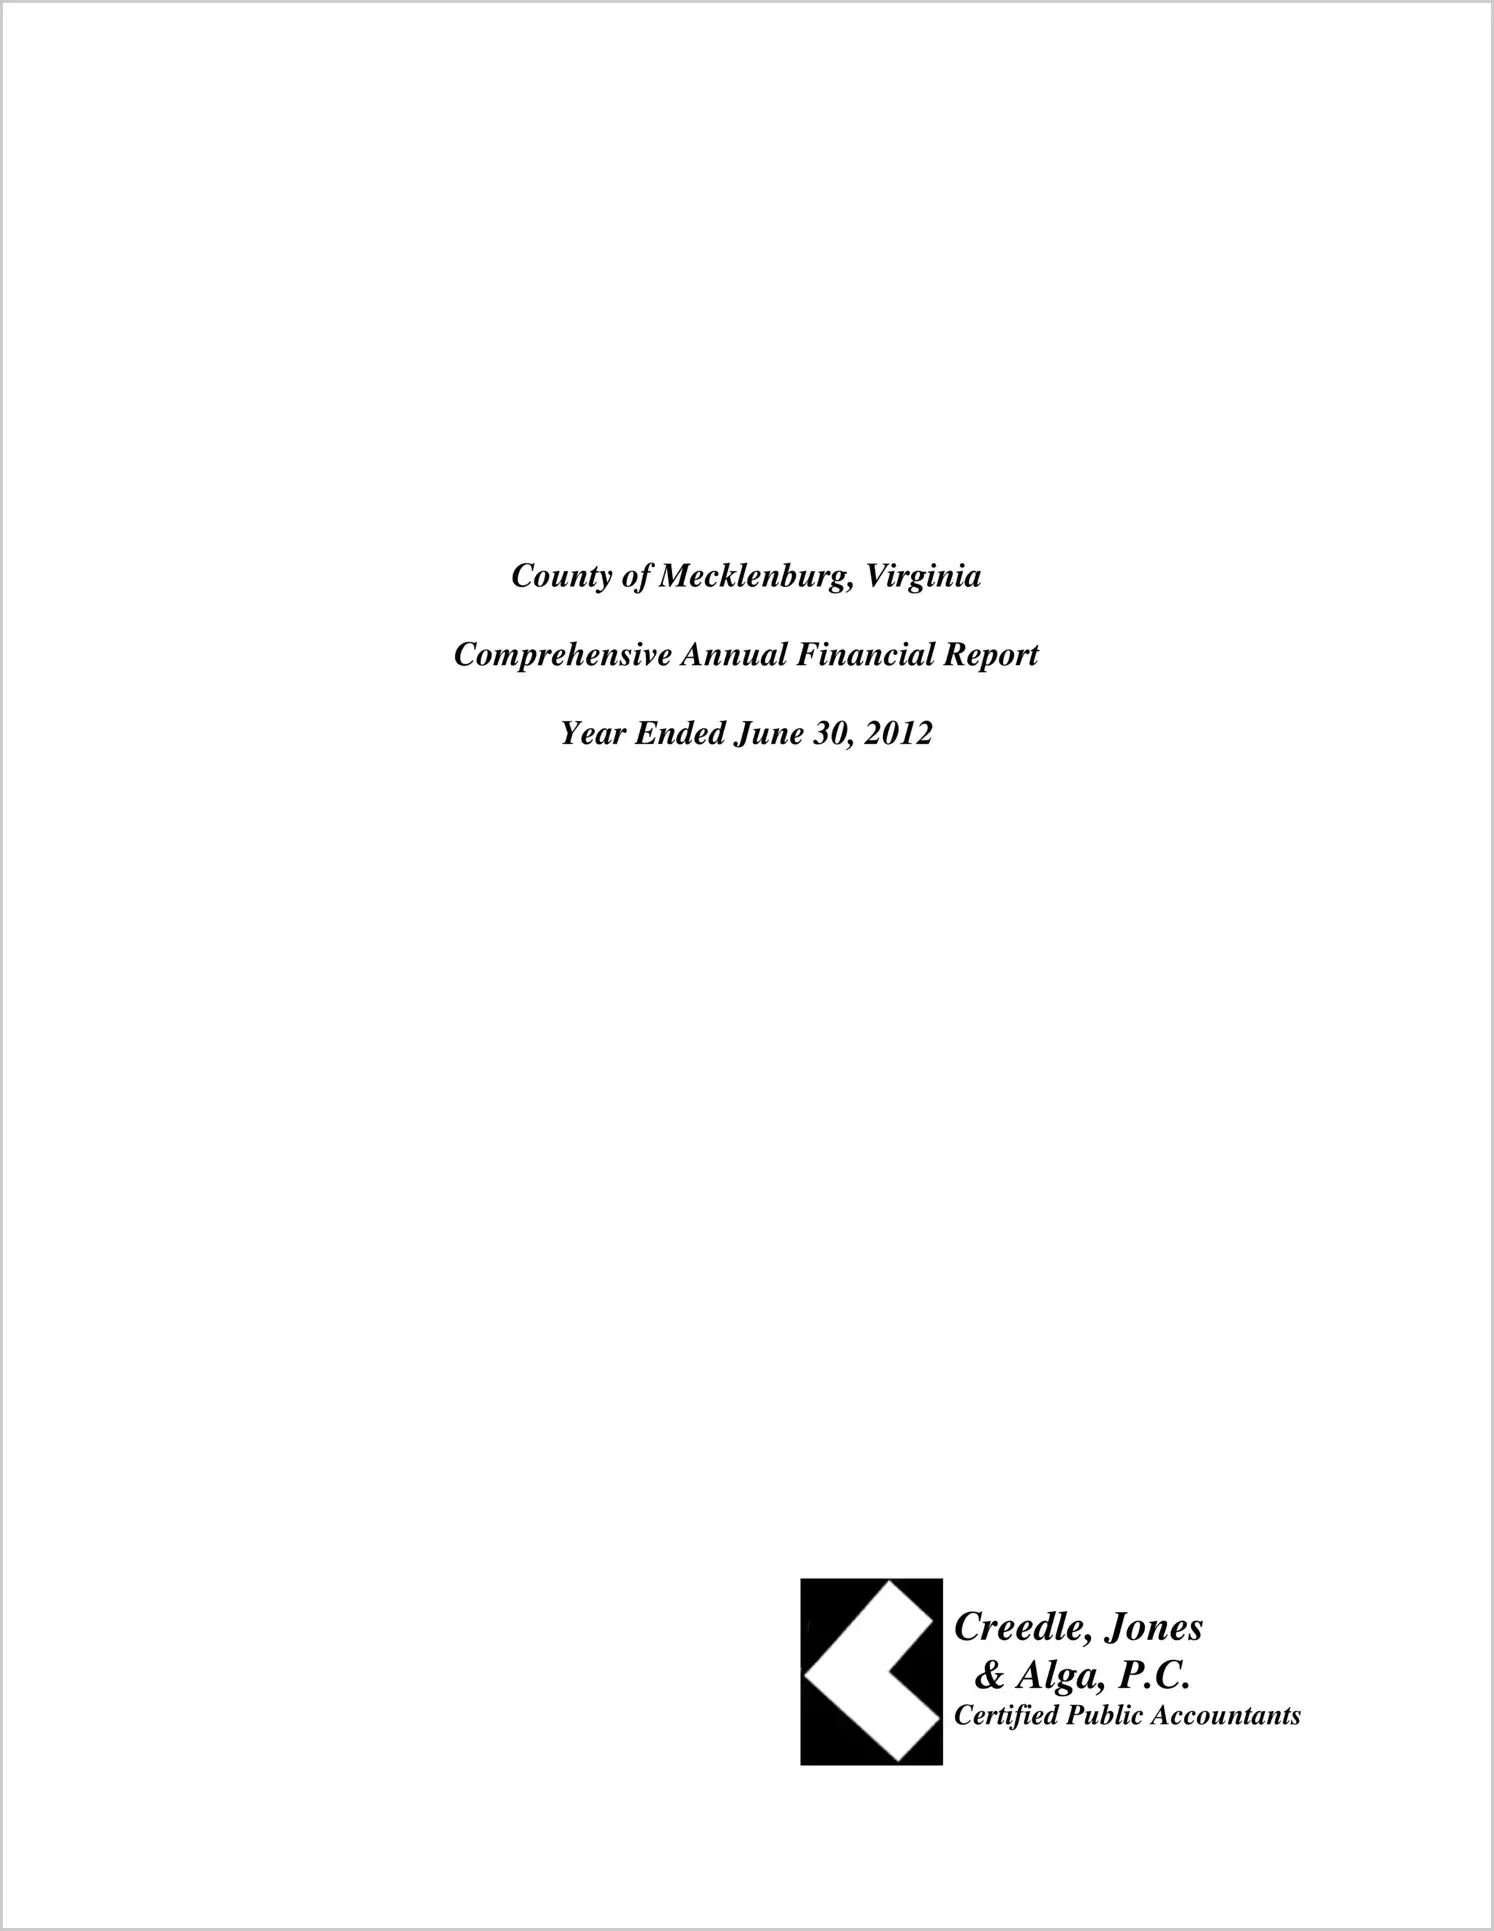 2012 Annual Financial Report for County of Mecklenburg